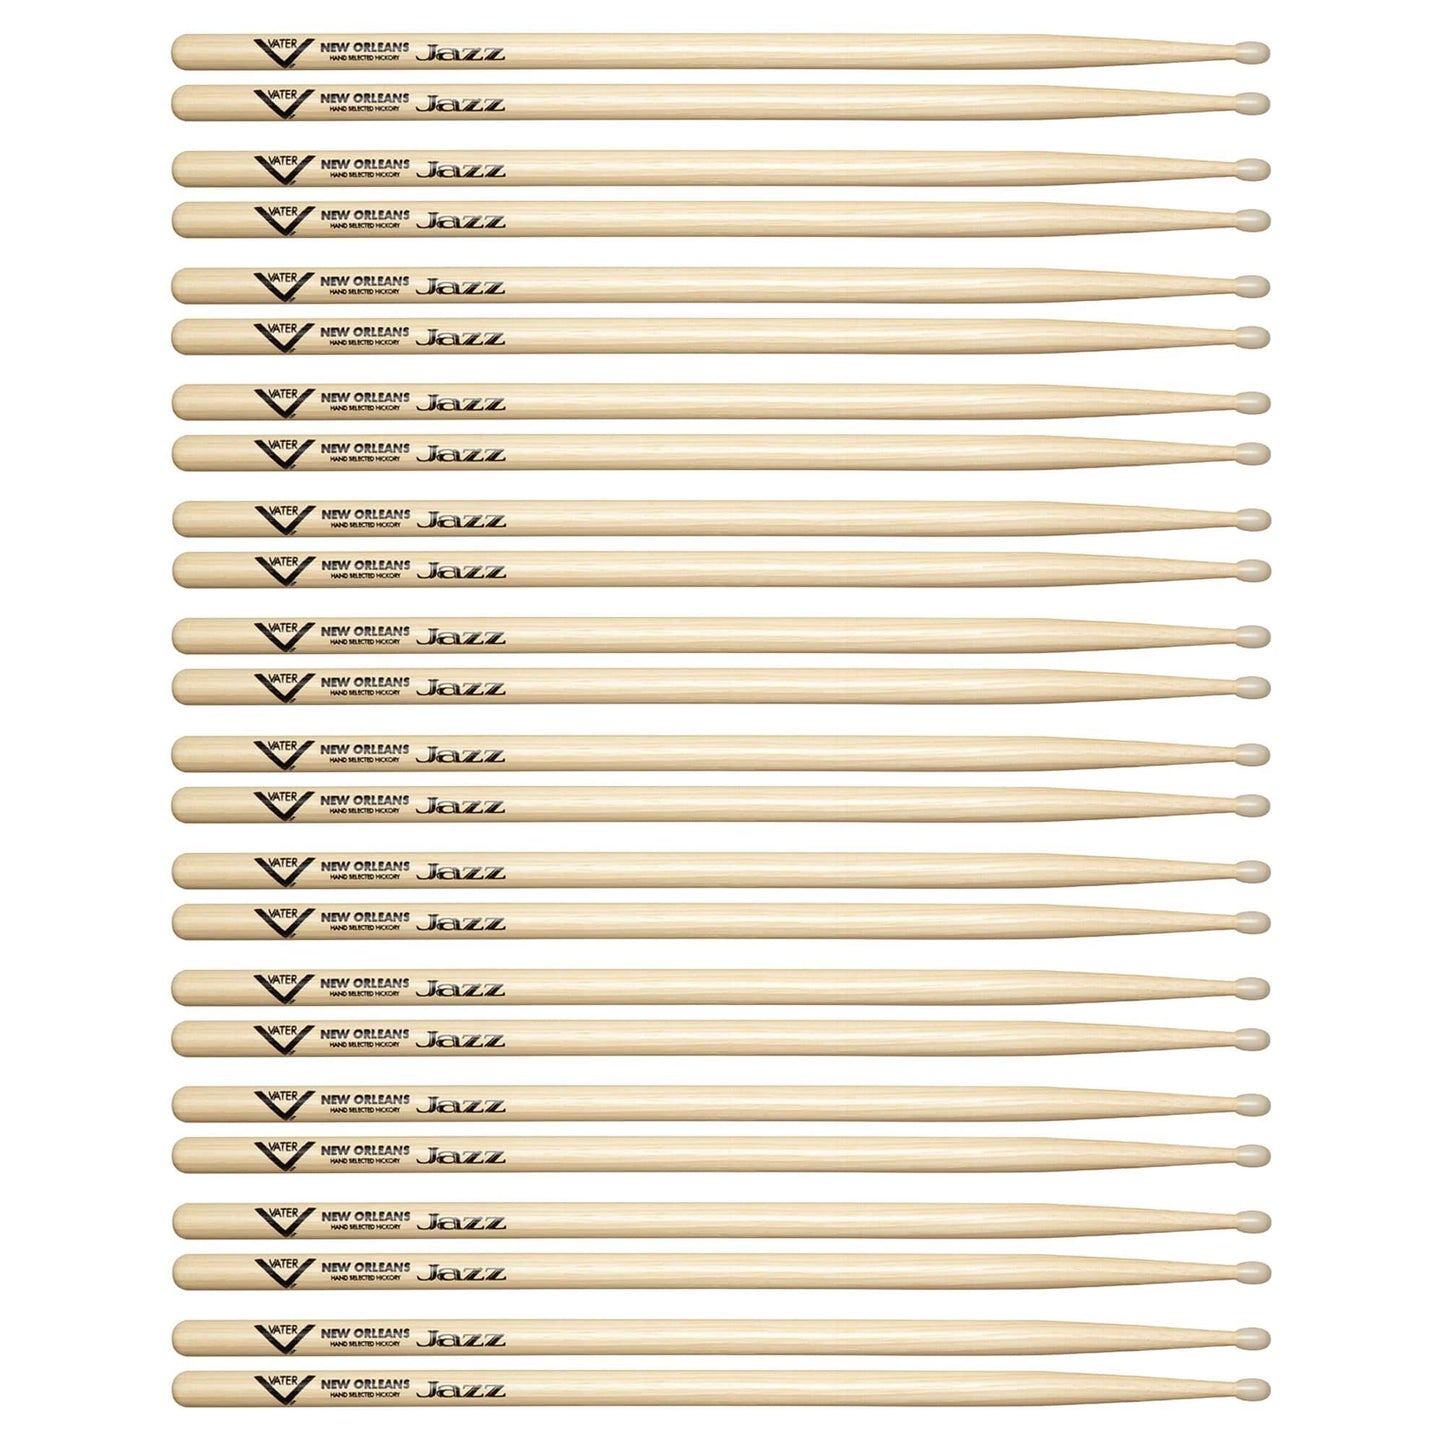 Vater Hickory New Orleans Jazz Nylon Tip Drum Sticks (12 Pair Bundle) Drums and Percussion / Parts and Accessories / Drum Sticks and Mallets